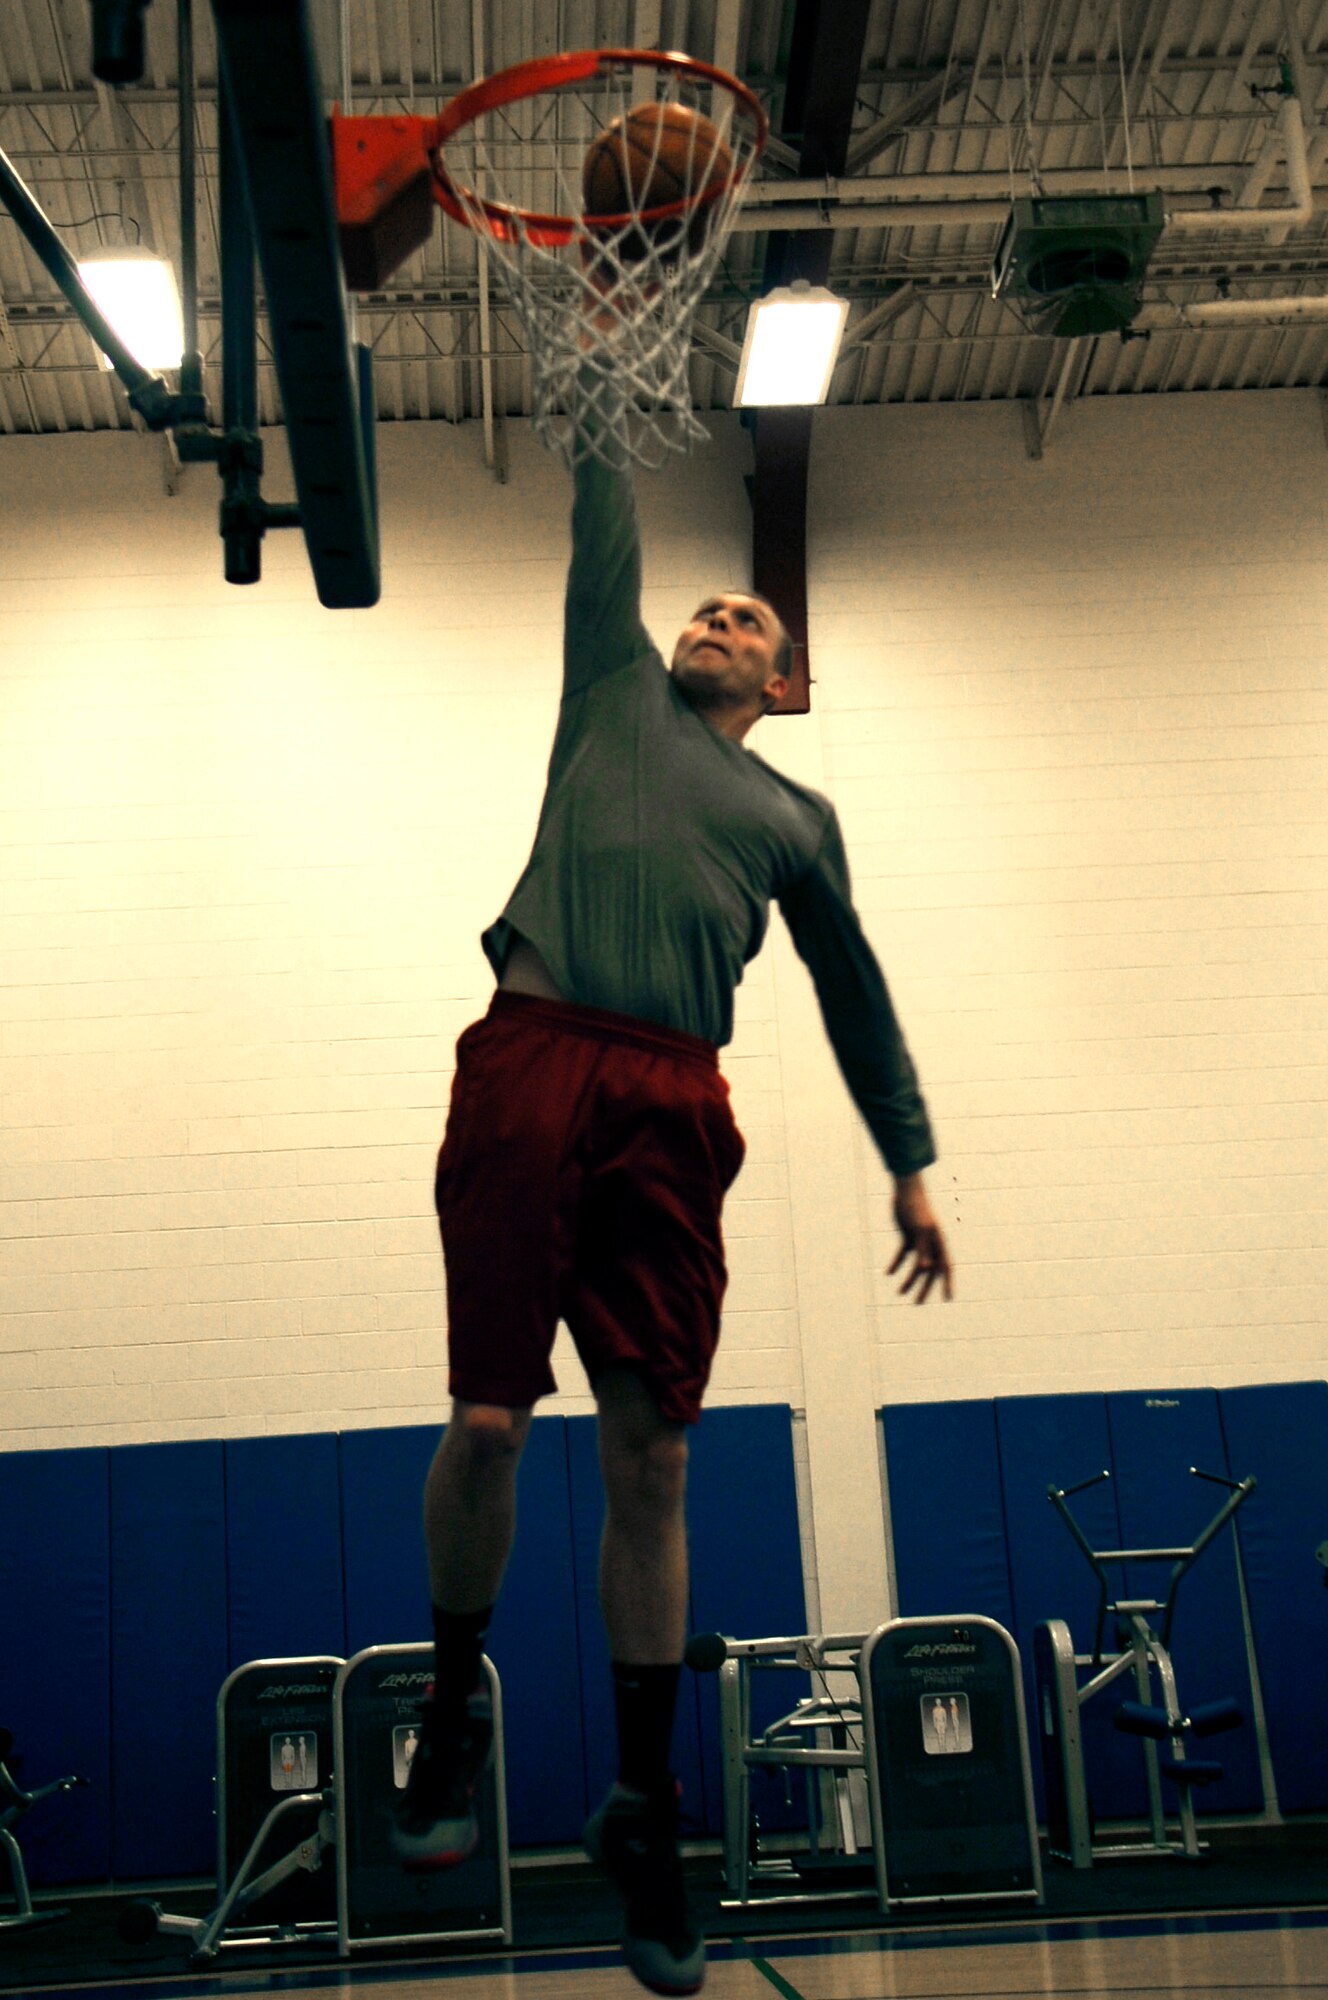 Senior Airman Tyler Cerney, 544th Intelligence, Surveillance and Reconnaissance Group, detachment 1, intelligence analyst, dunks a basketball, June 29, 2015, Vandenberg Air Force Base, Calif. Although being a Unit Fitness Program Monitor, and trained Physical Training Leader, can be demanding, Cerney not only accepts the responsibility – he relishes it. (U.S. Air Force photo by Senior Airman Shane Phipps/Released)